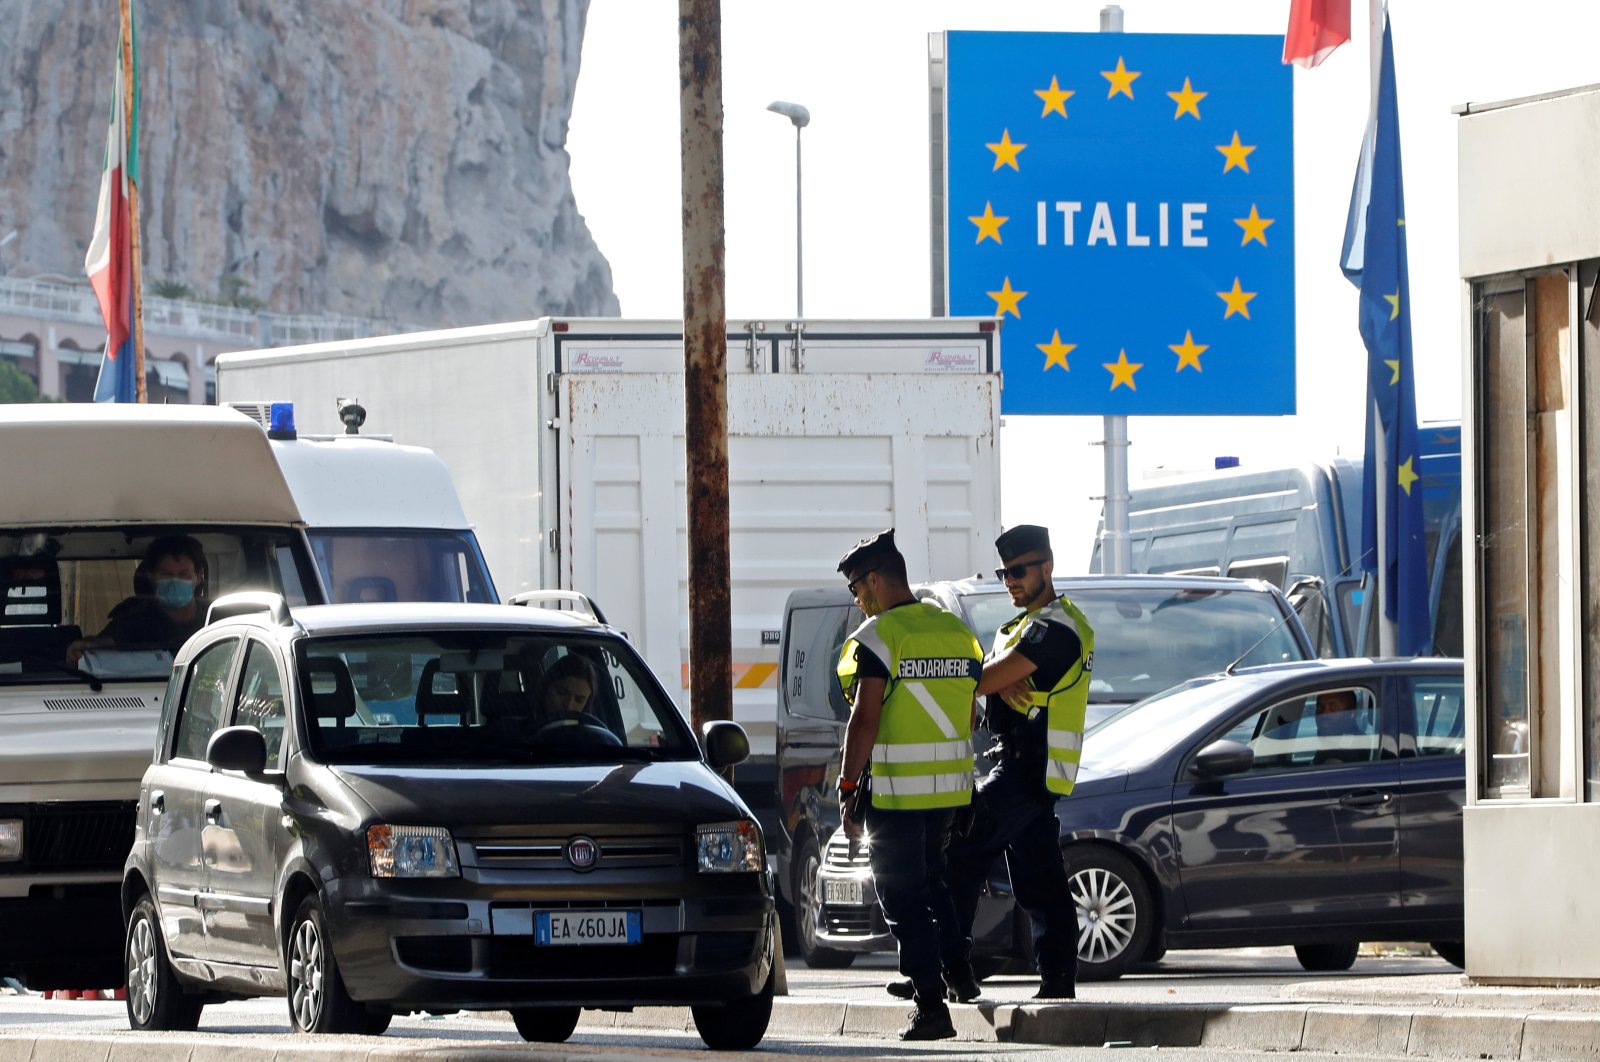 French gendarmes approach a car driver at the border check point Saint-Ludovic at the Franco-Italian border, after France reopened its border to Italians as COVID-19 travel restrictions across Europe are gradually eased, in Menton, France, June 15, 2020. (Reuters Photo)